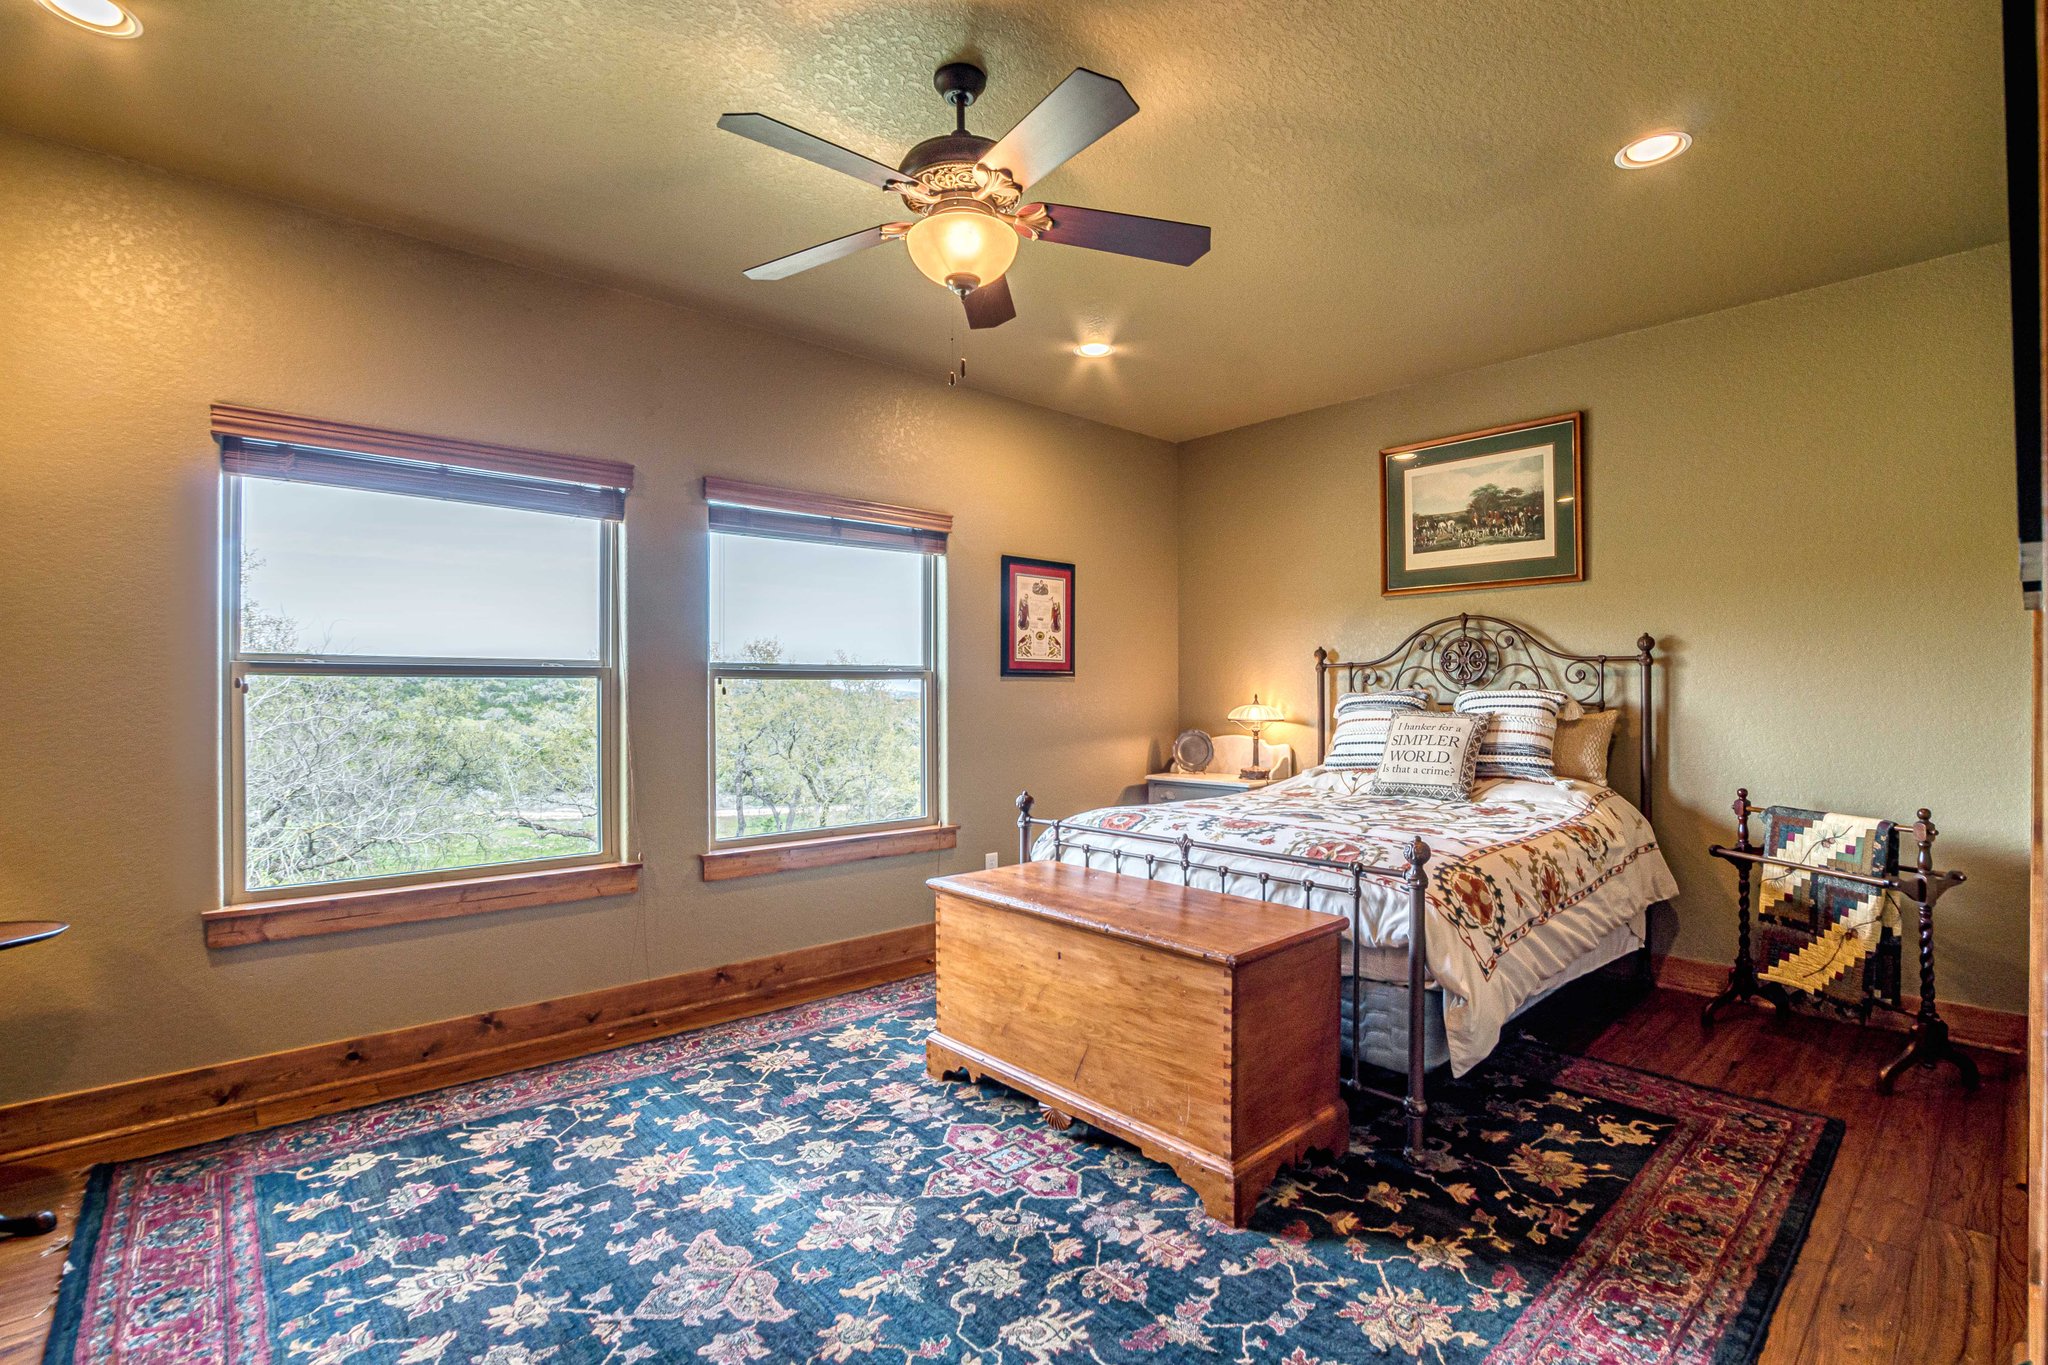 Upstairs bedroom 4 with hill country views.